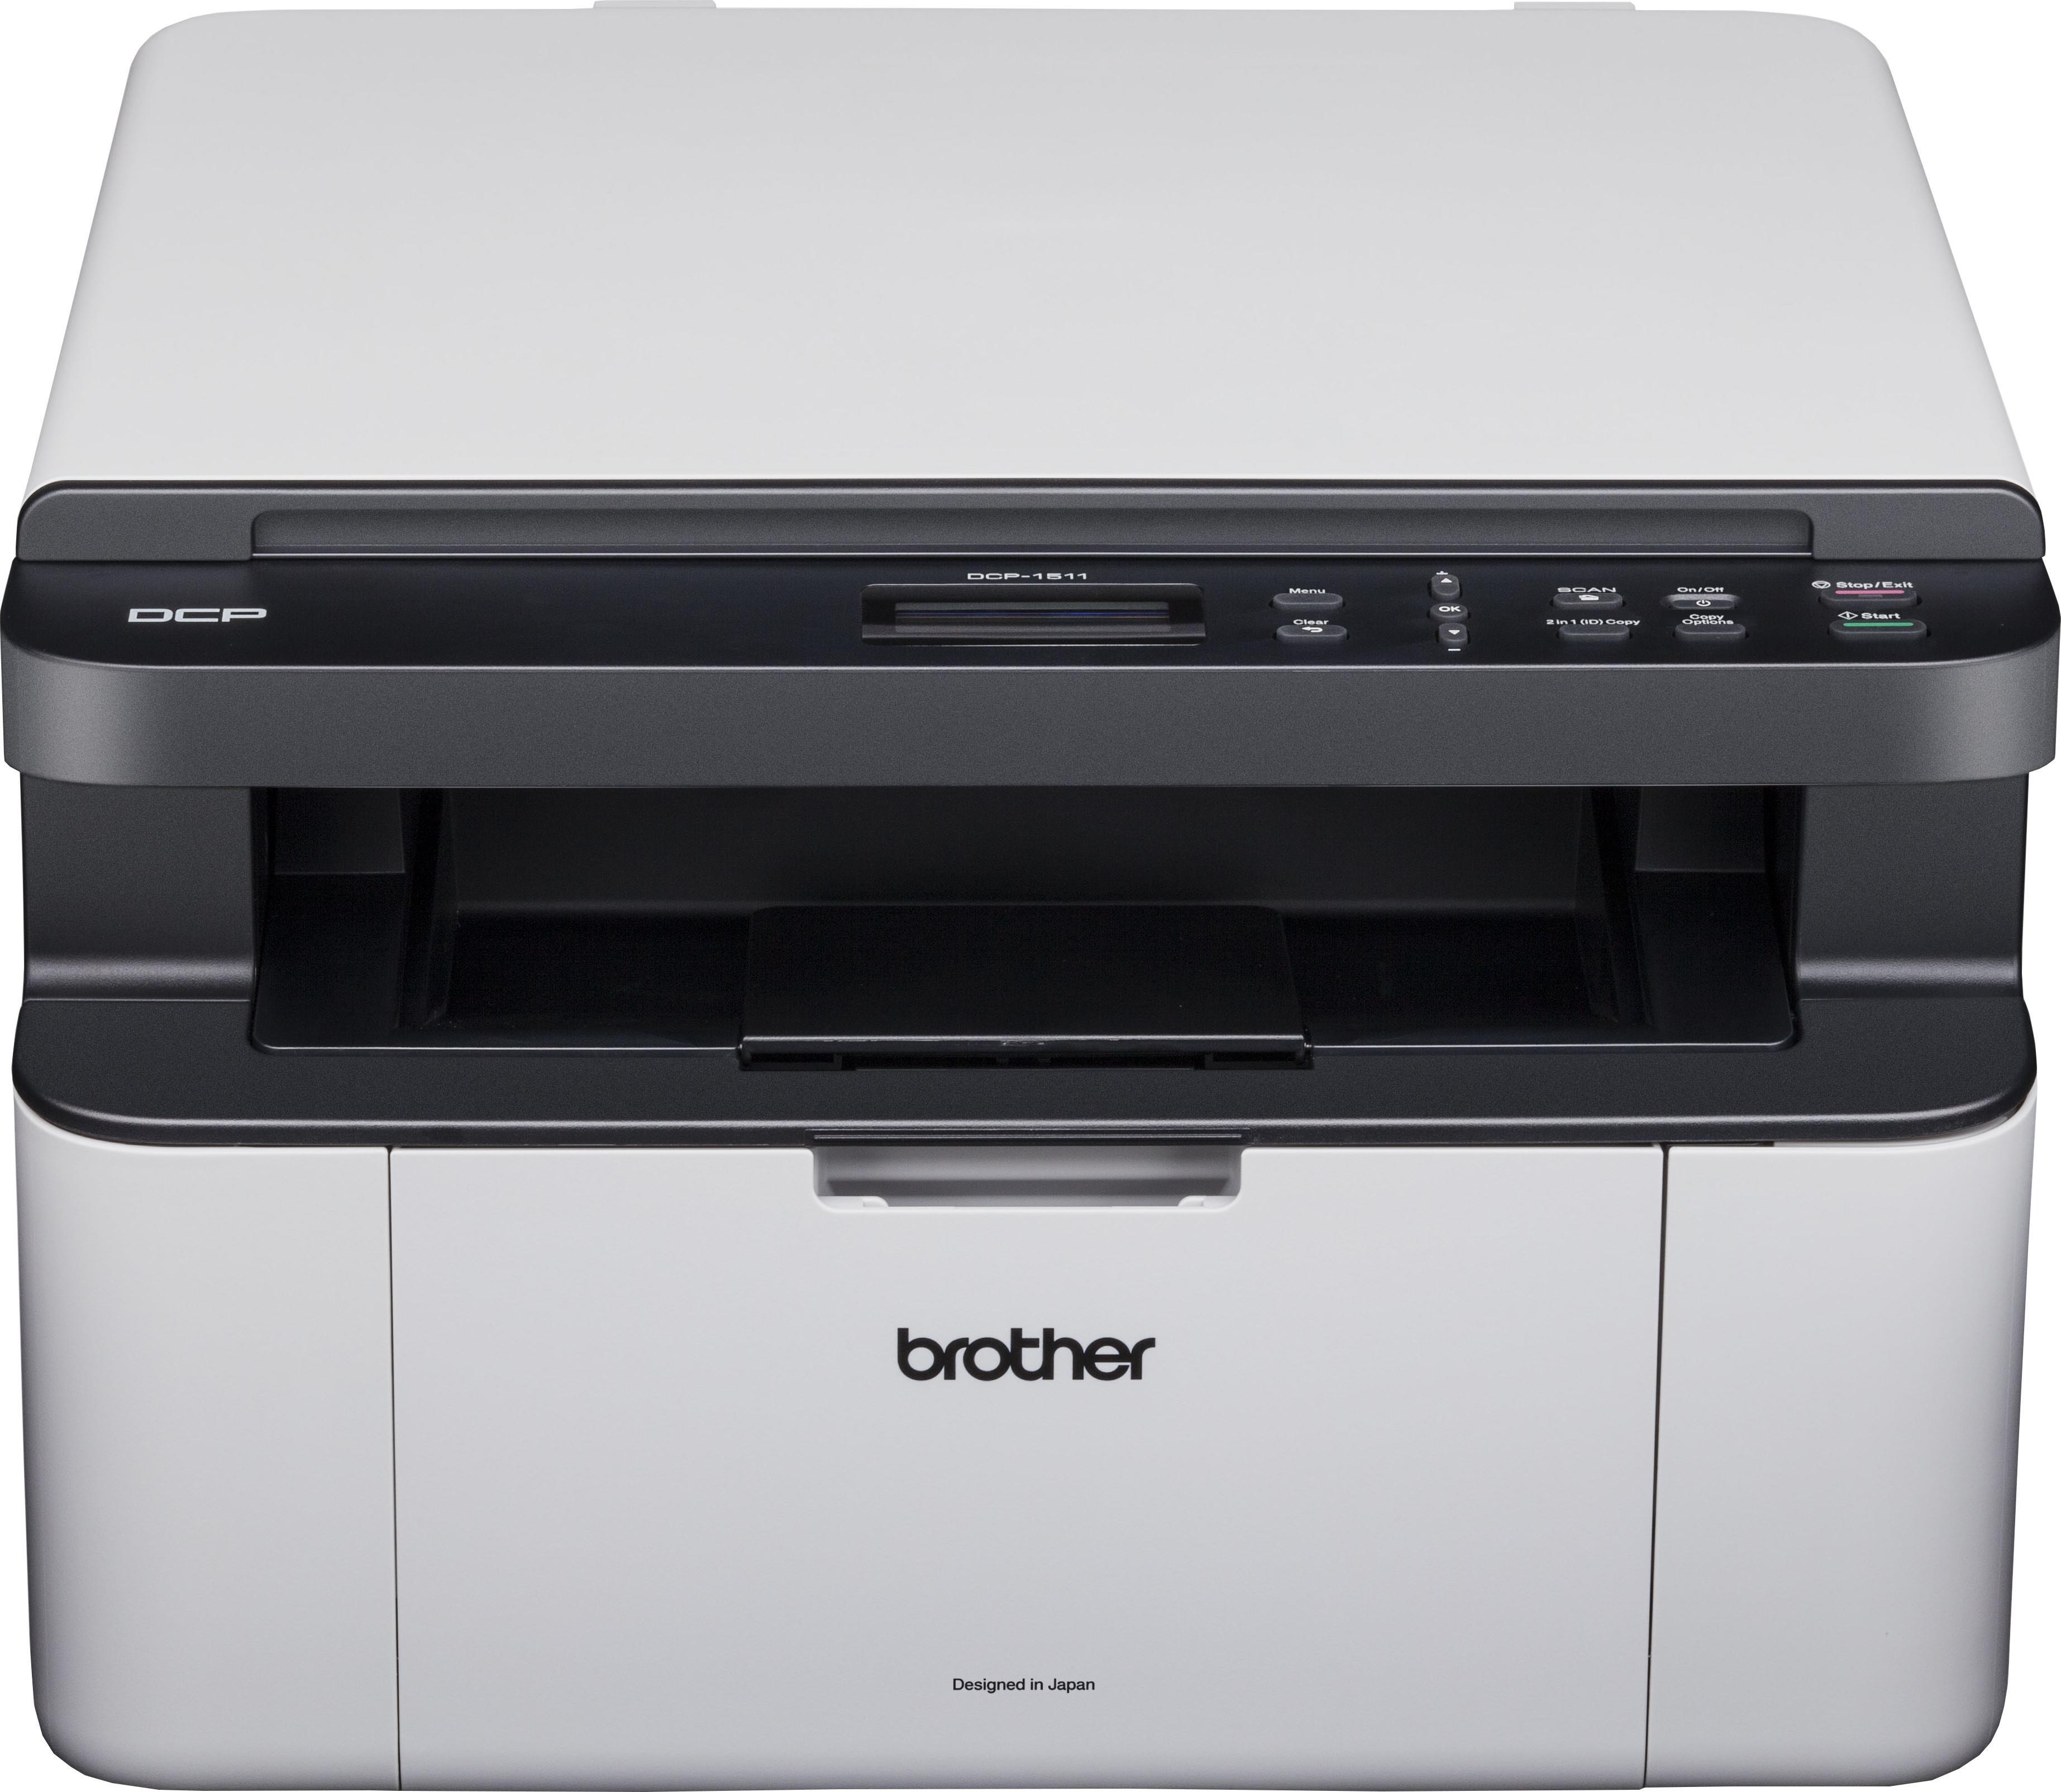 brother mfc 8460n driver download